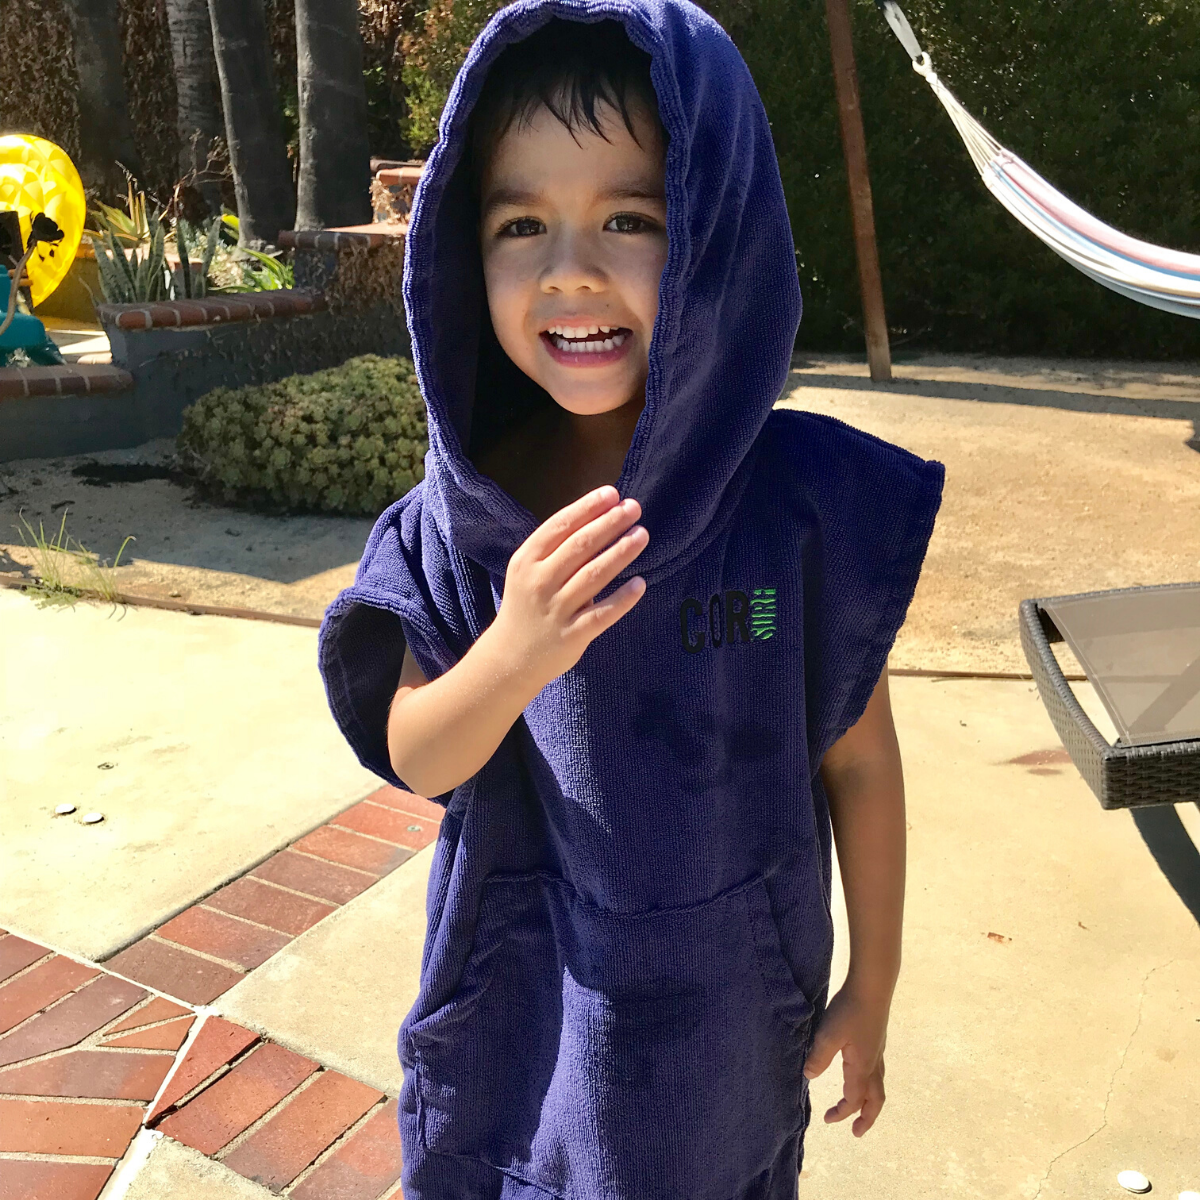 kids changing towel poncho for the beach or pool